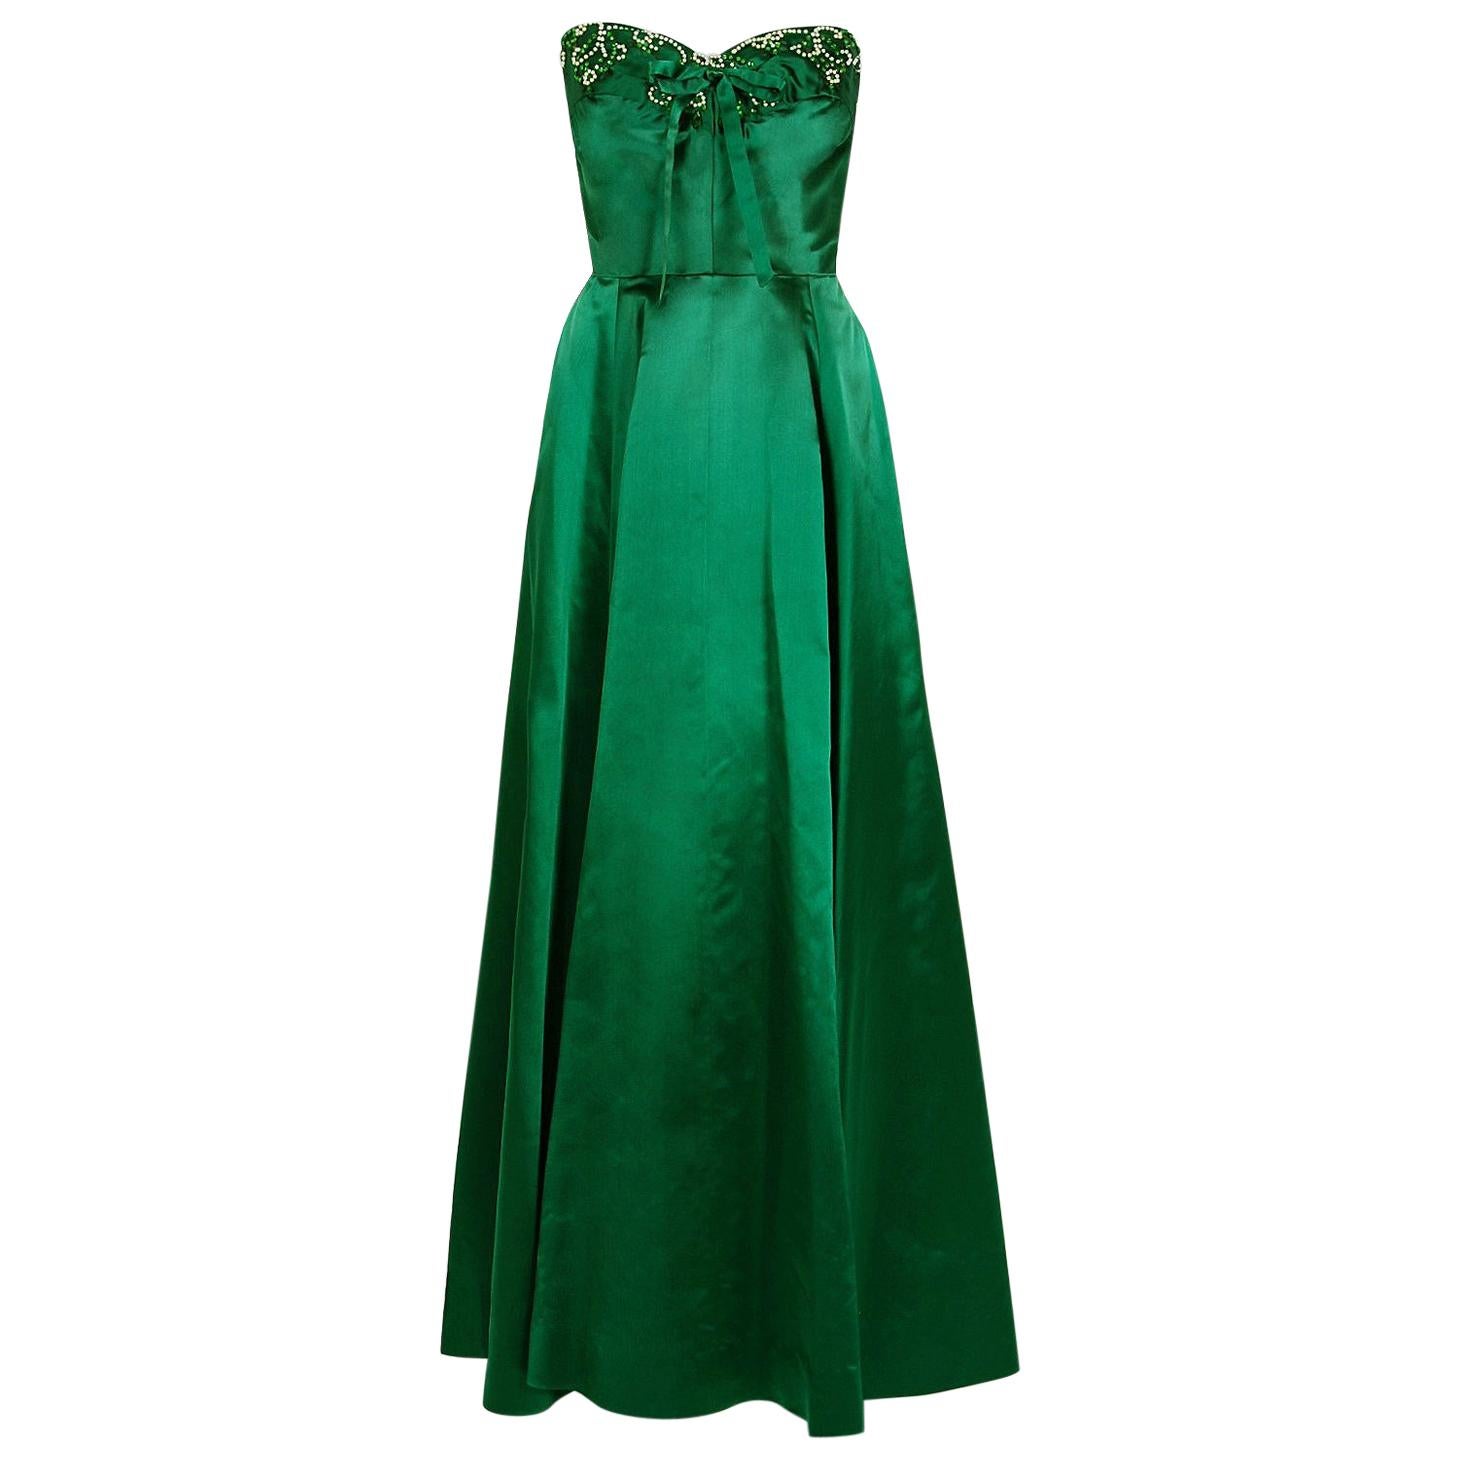 1950's Helga Couture Emerald-Green Beaded Satin Strapless Bombshell Evening Gown